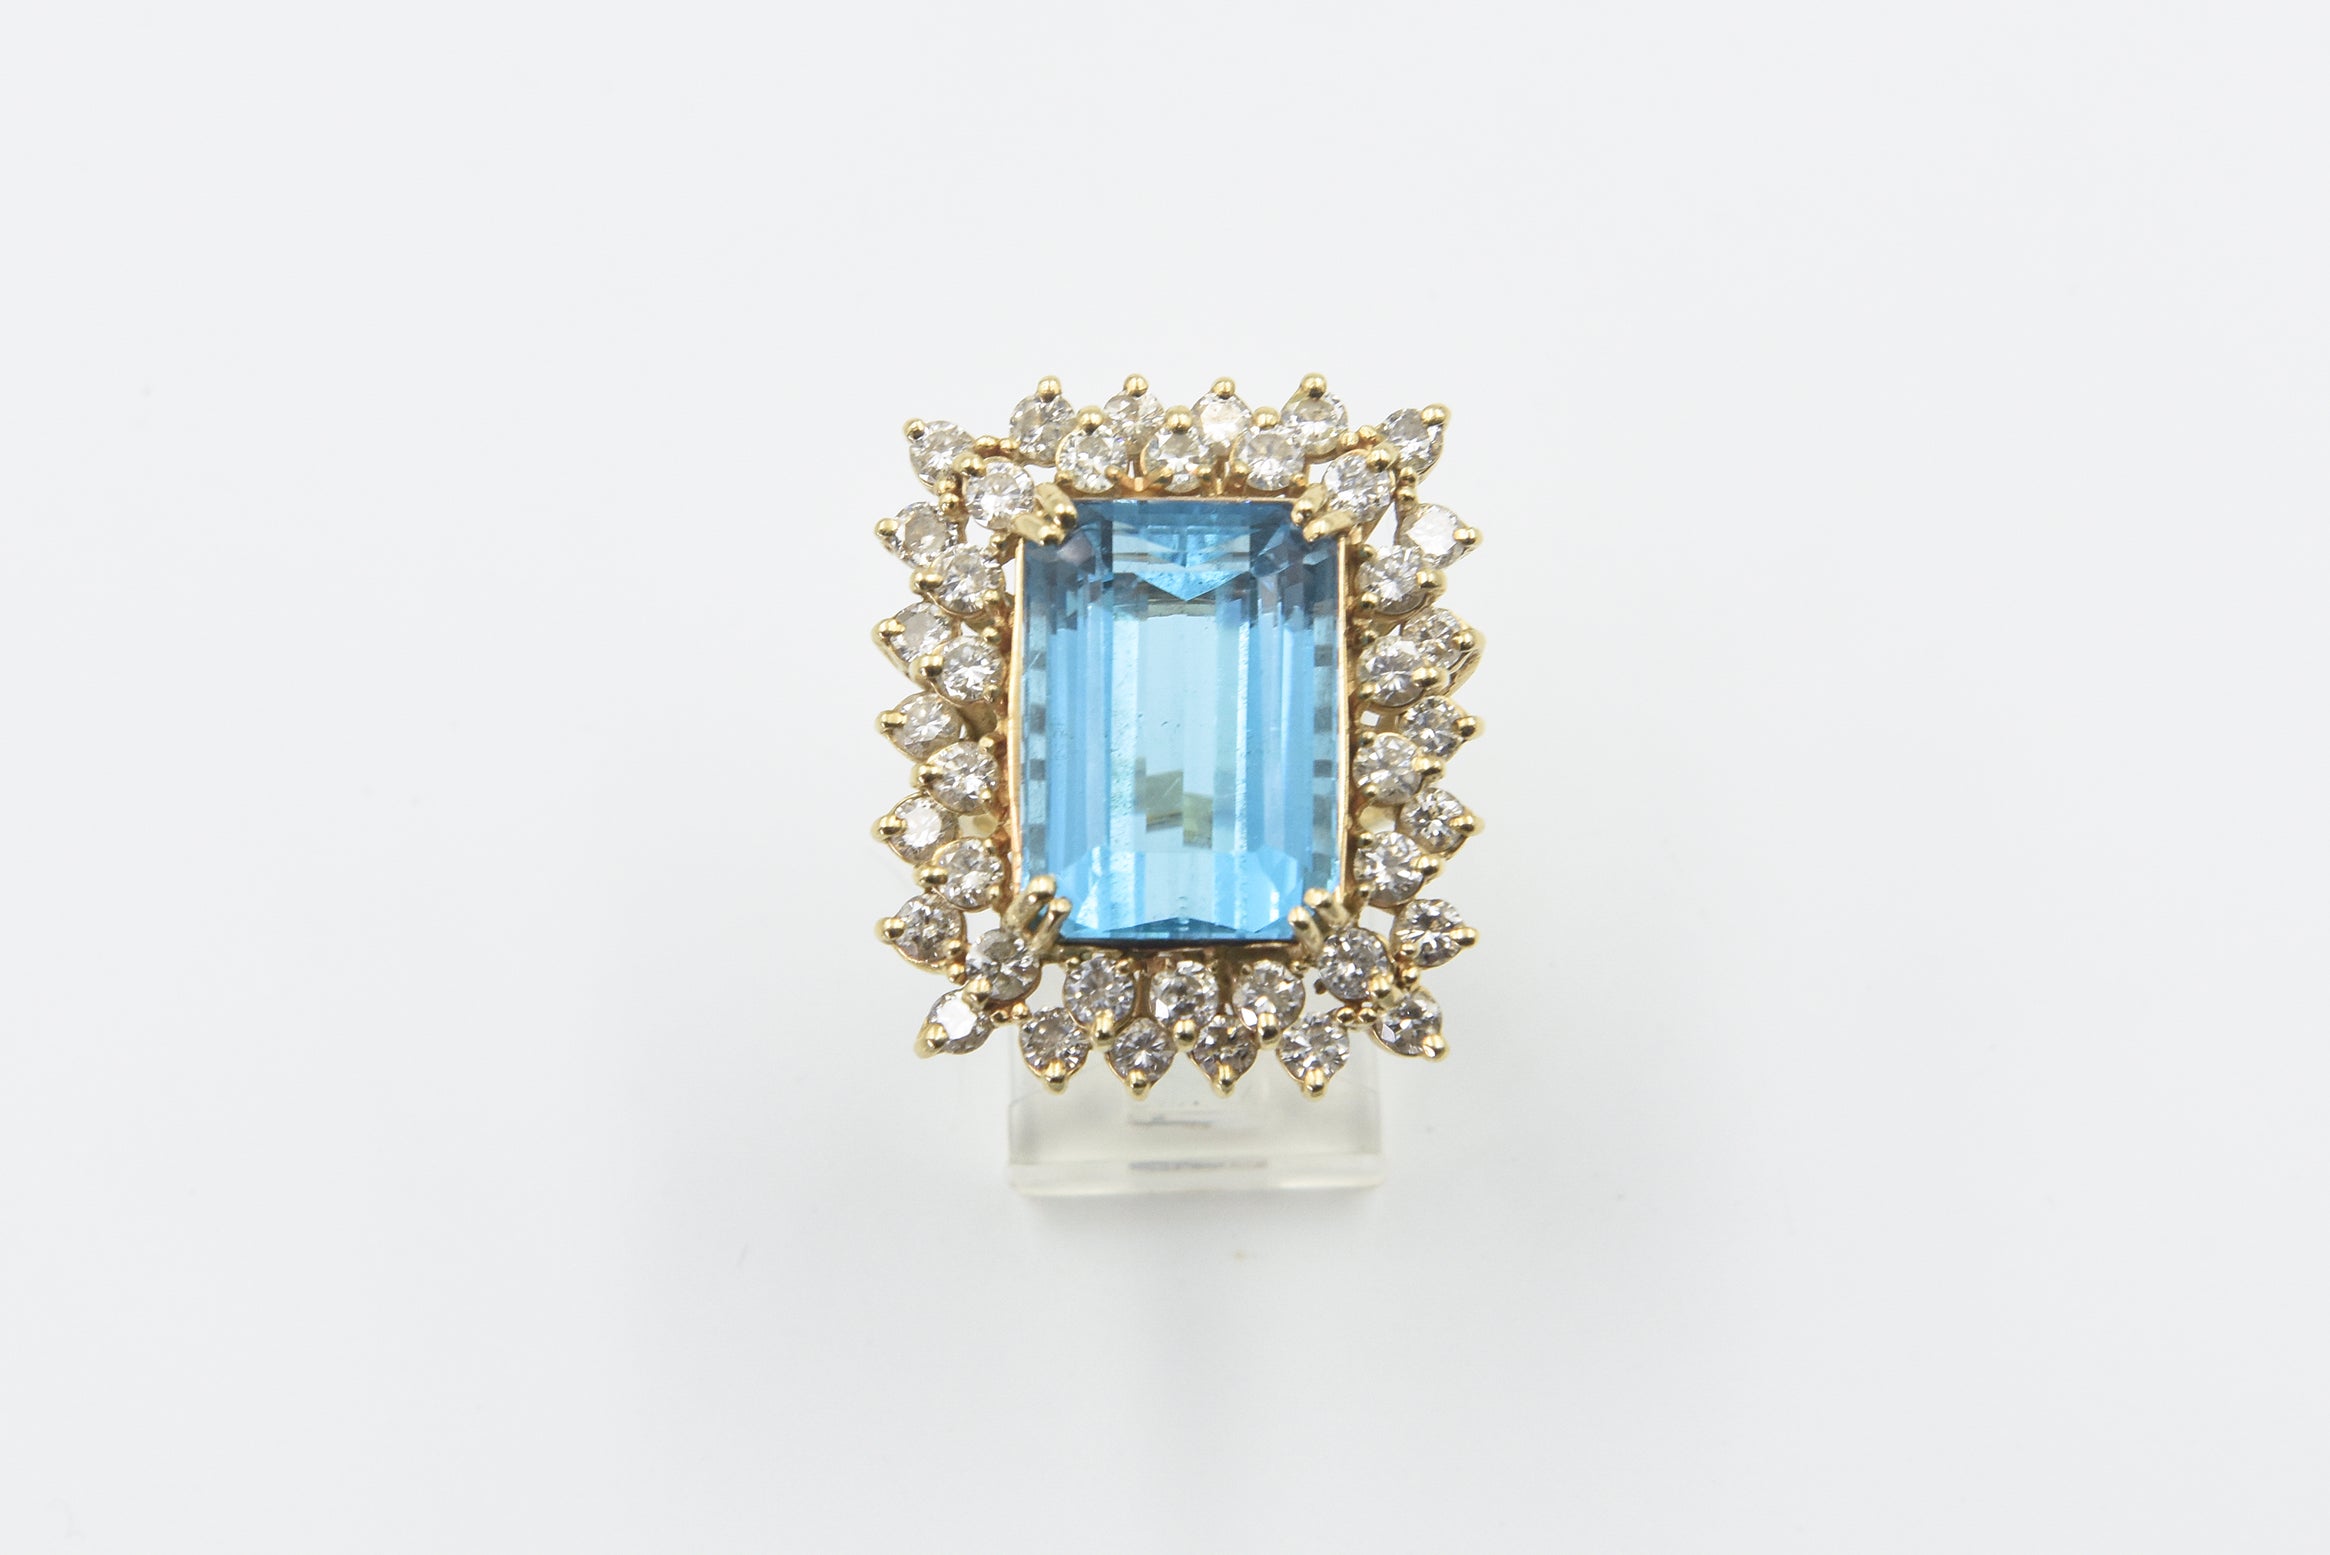 Gorgeous emerald cut blue topaz mounted in two tier diamond frame.  The blue topaz weights approximately 18 carats.  The mounting has approximately 3.36 carats in diamonds set in a 14k yellow gold mounting.  The ring size is 7.25 US.  